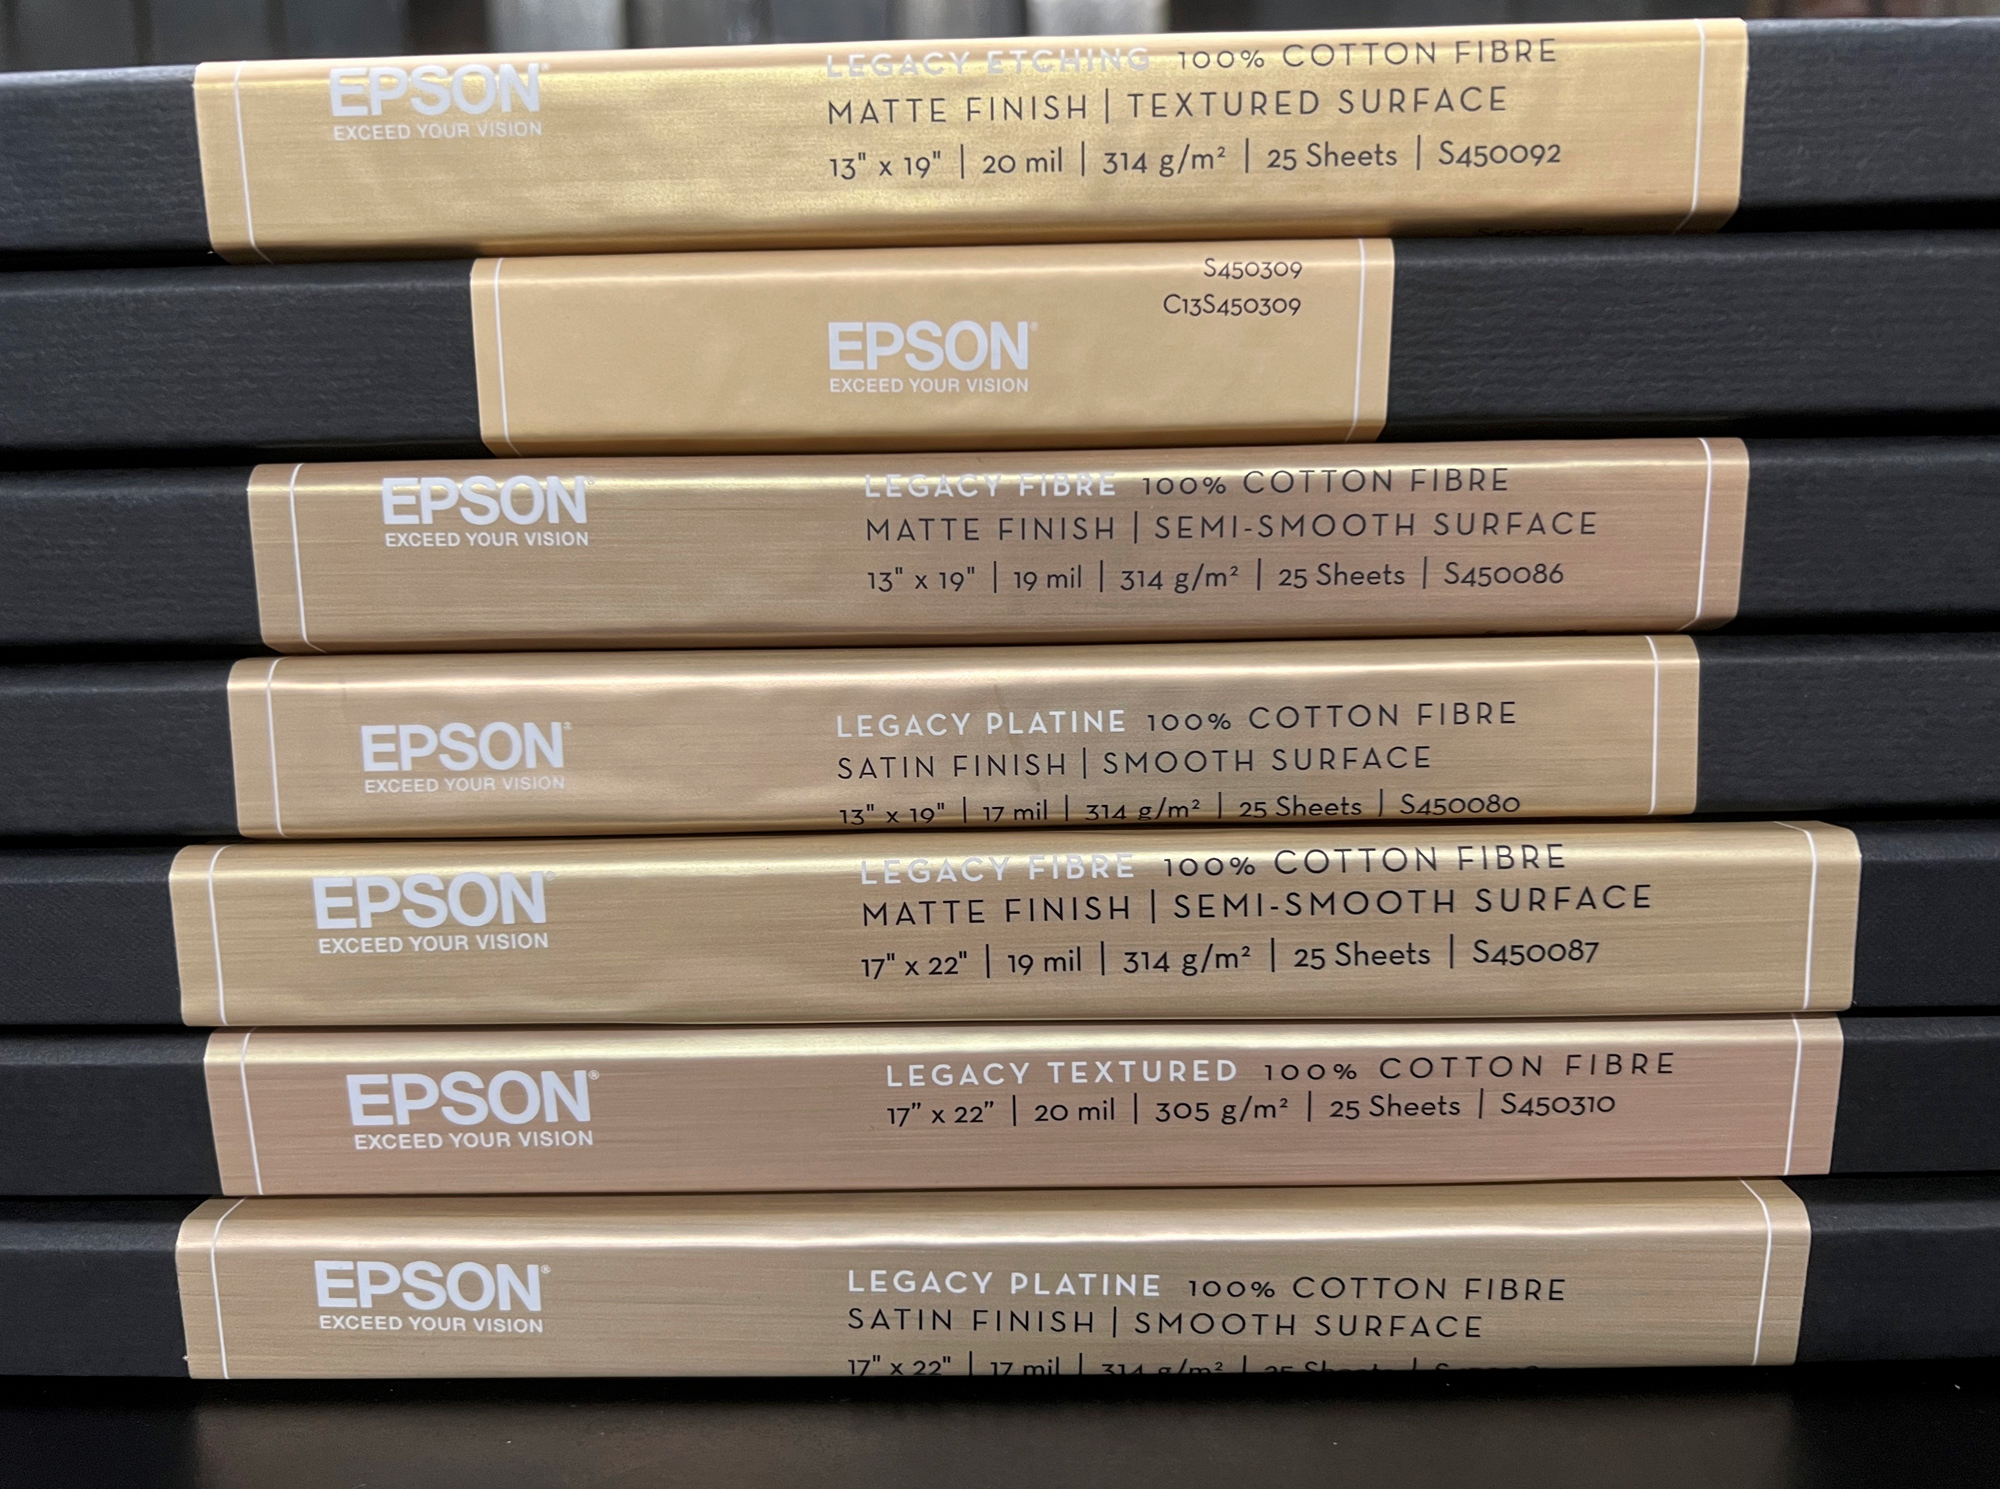 We cover all the Epson papers in our video